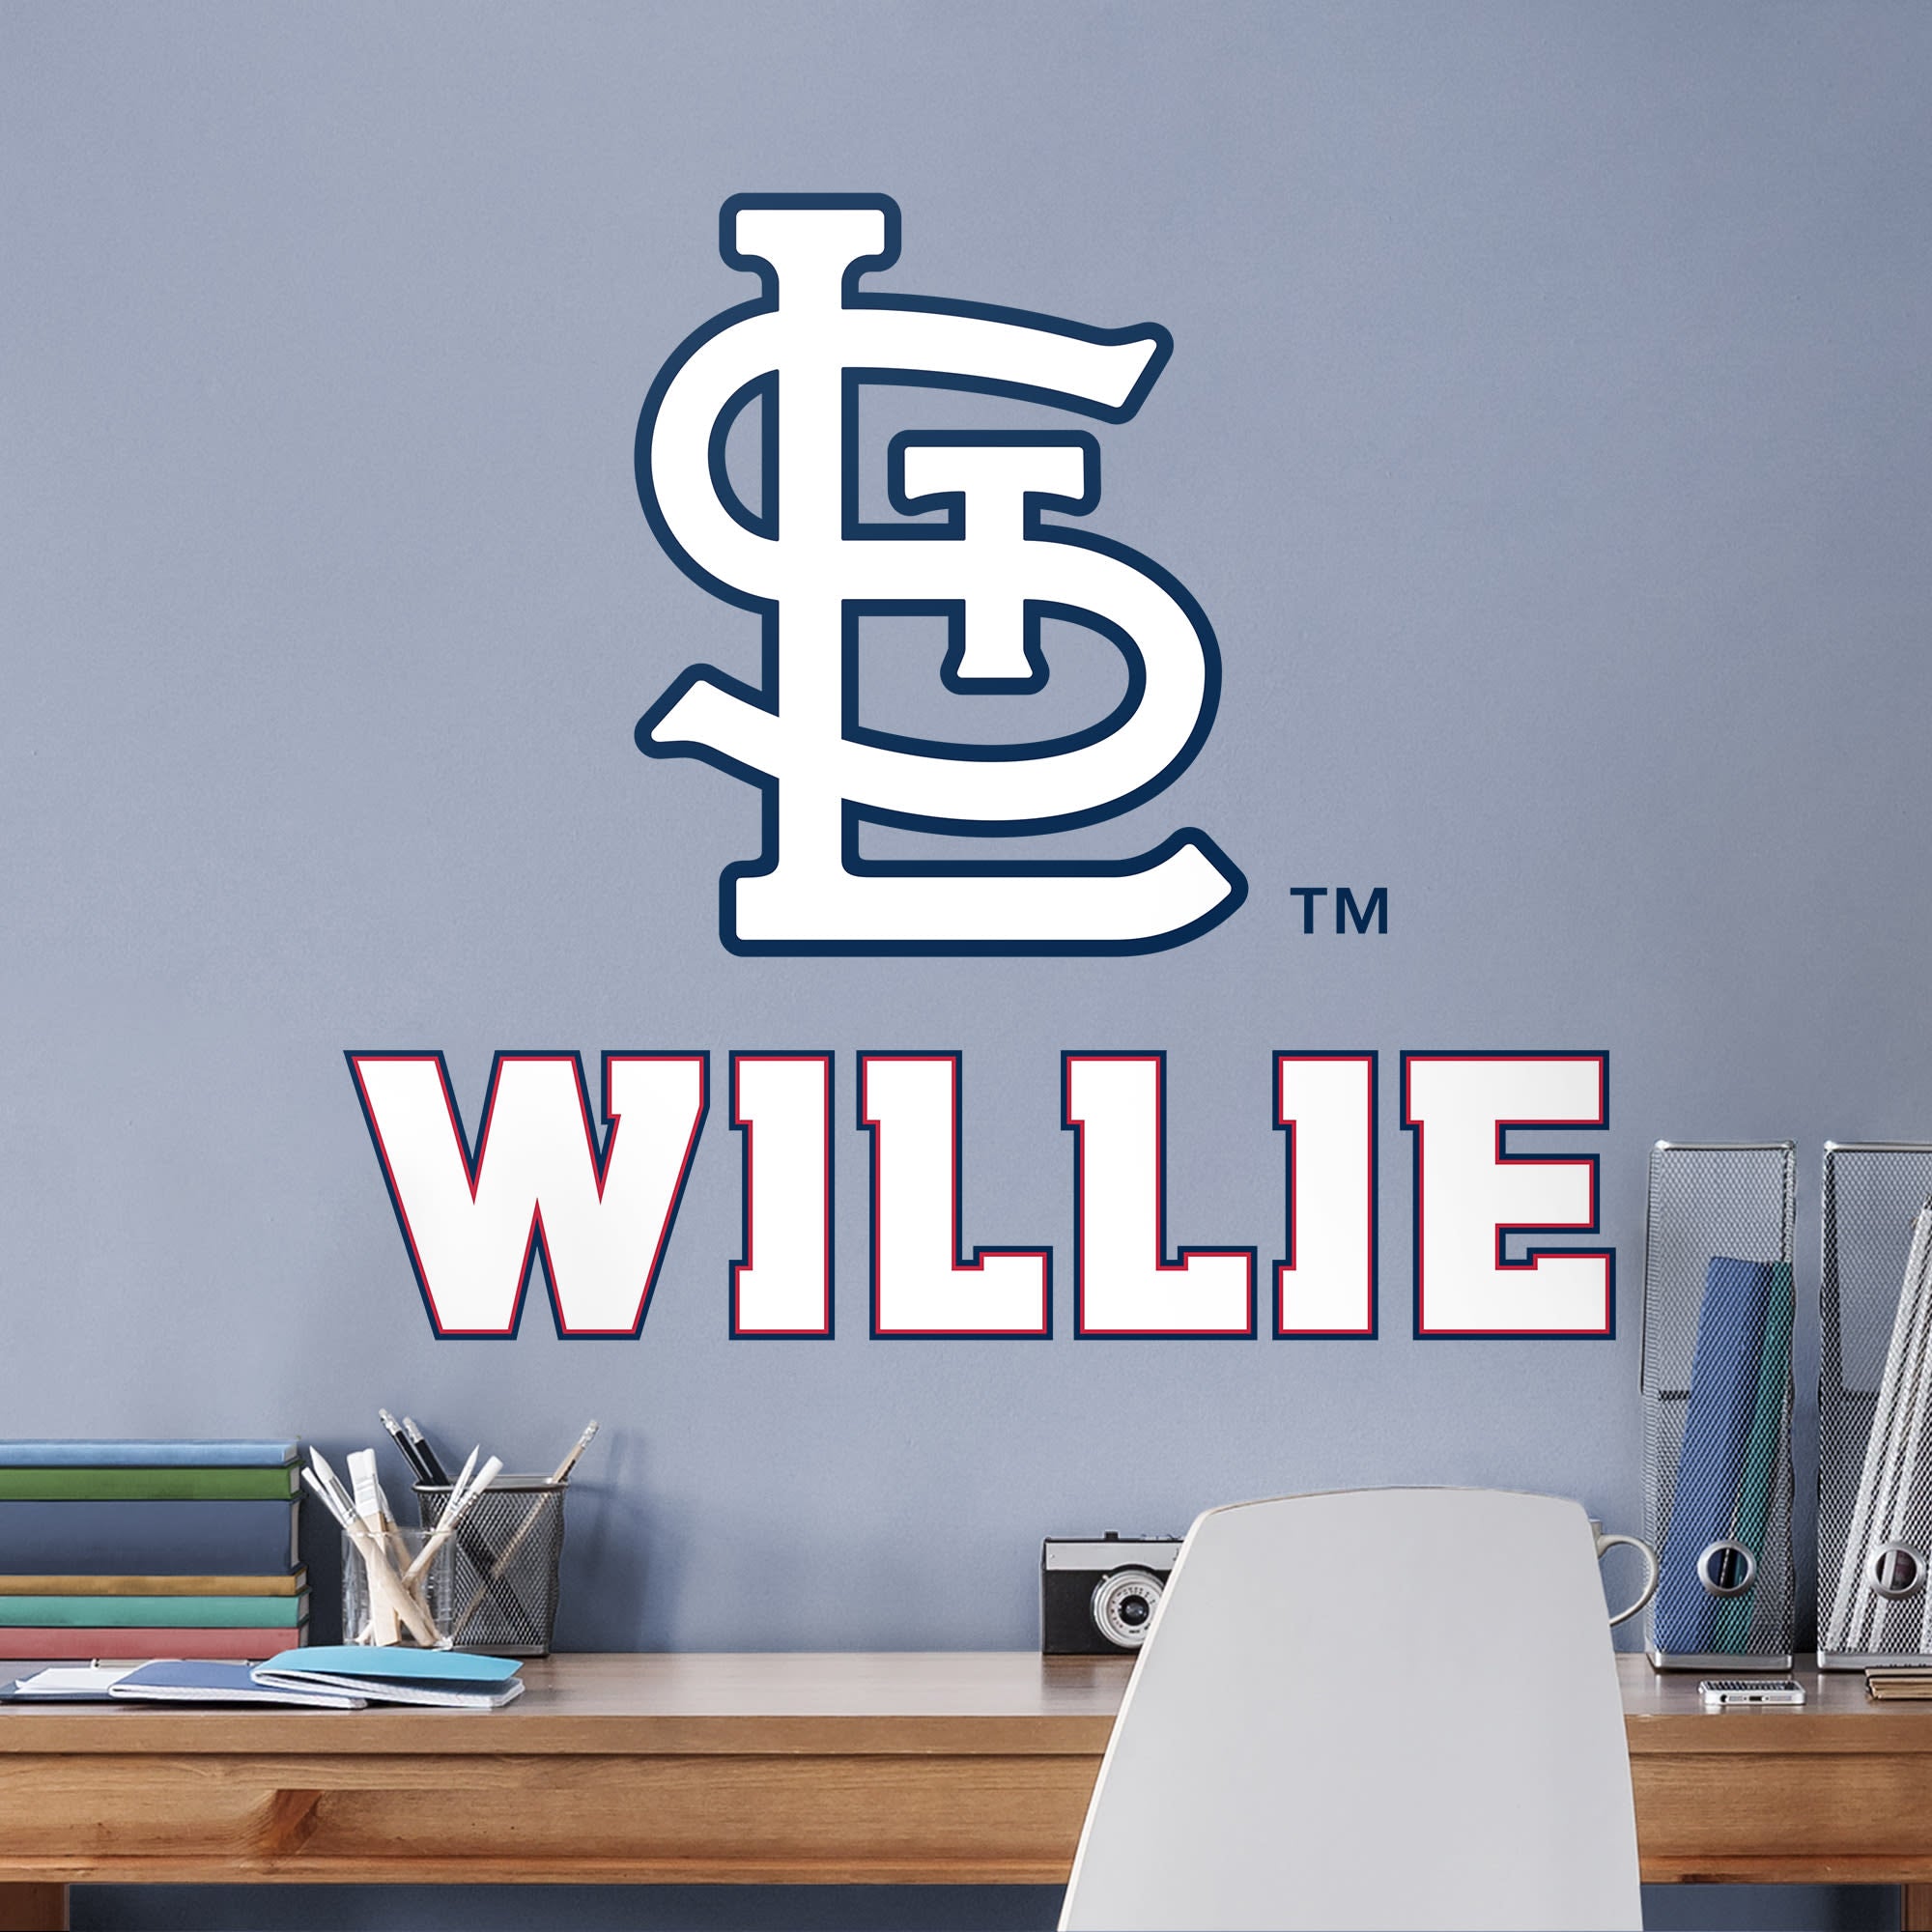 St. Louis Cardinals: "STL" Stacked Personalized Name - Officially Licensed MLB Transfer Decal in White (52"W x 39.5"H) by Fathea